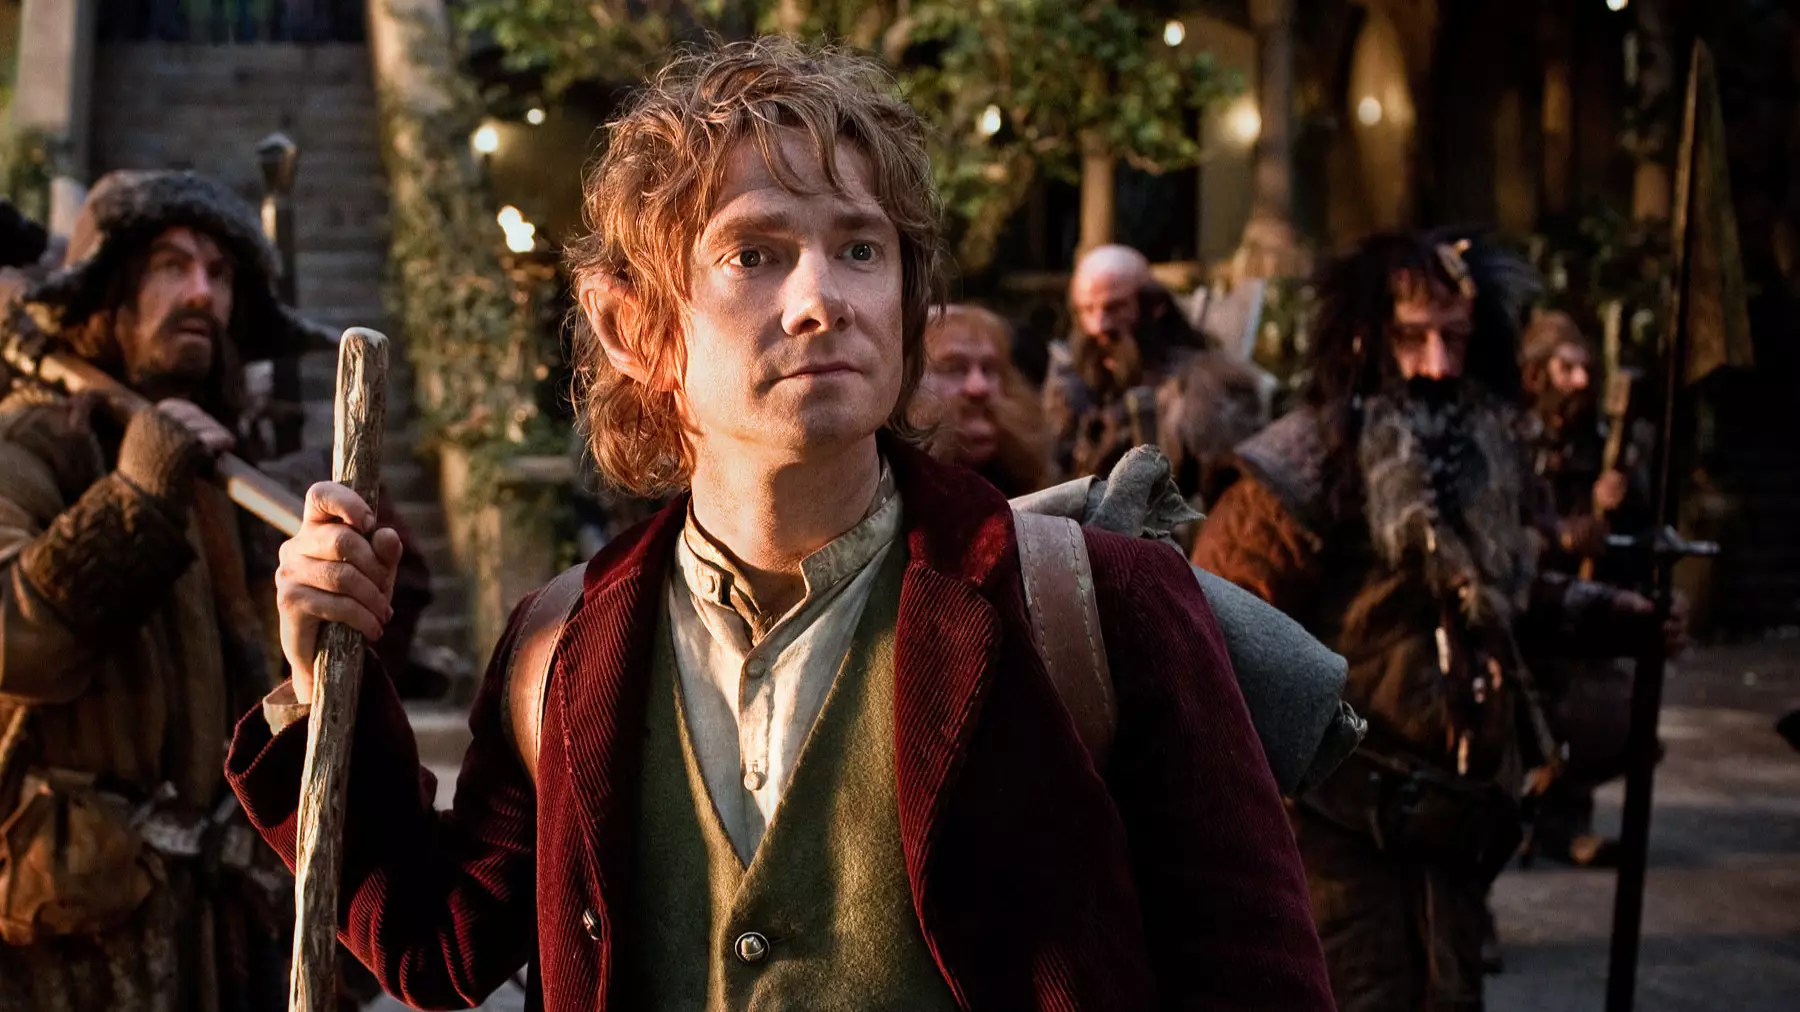 Teacher Suspended After Showing Students The Hobbit And To Kill A Mockingbird